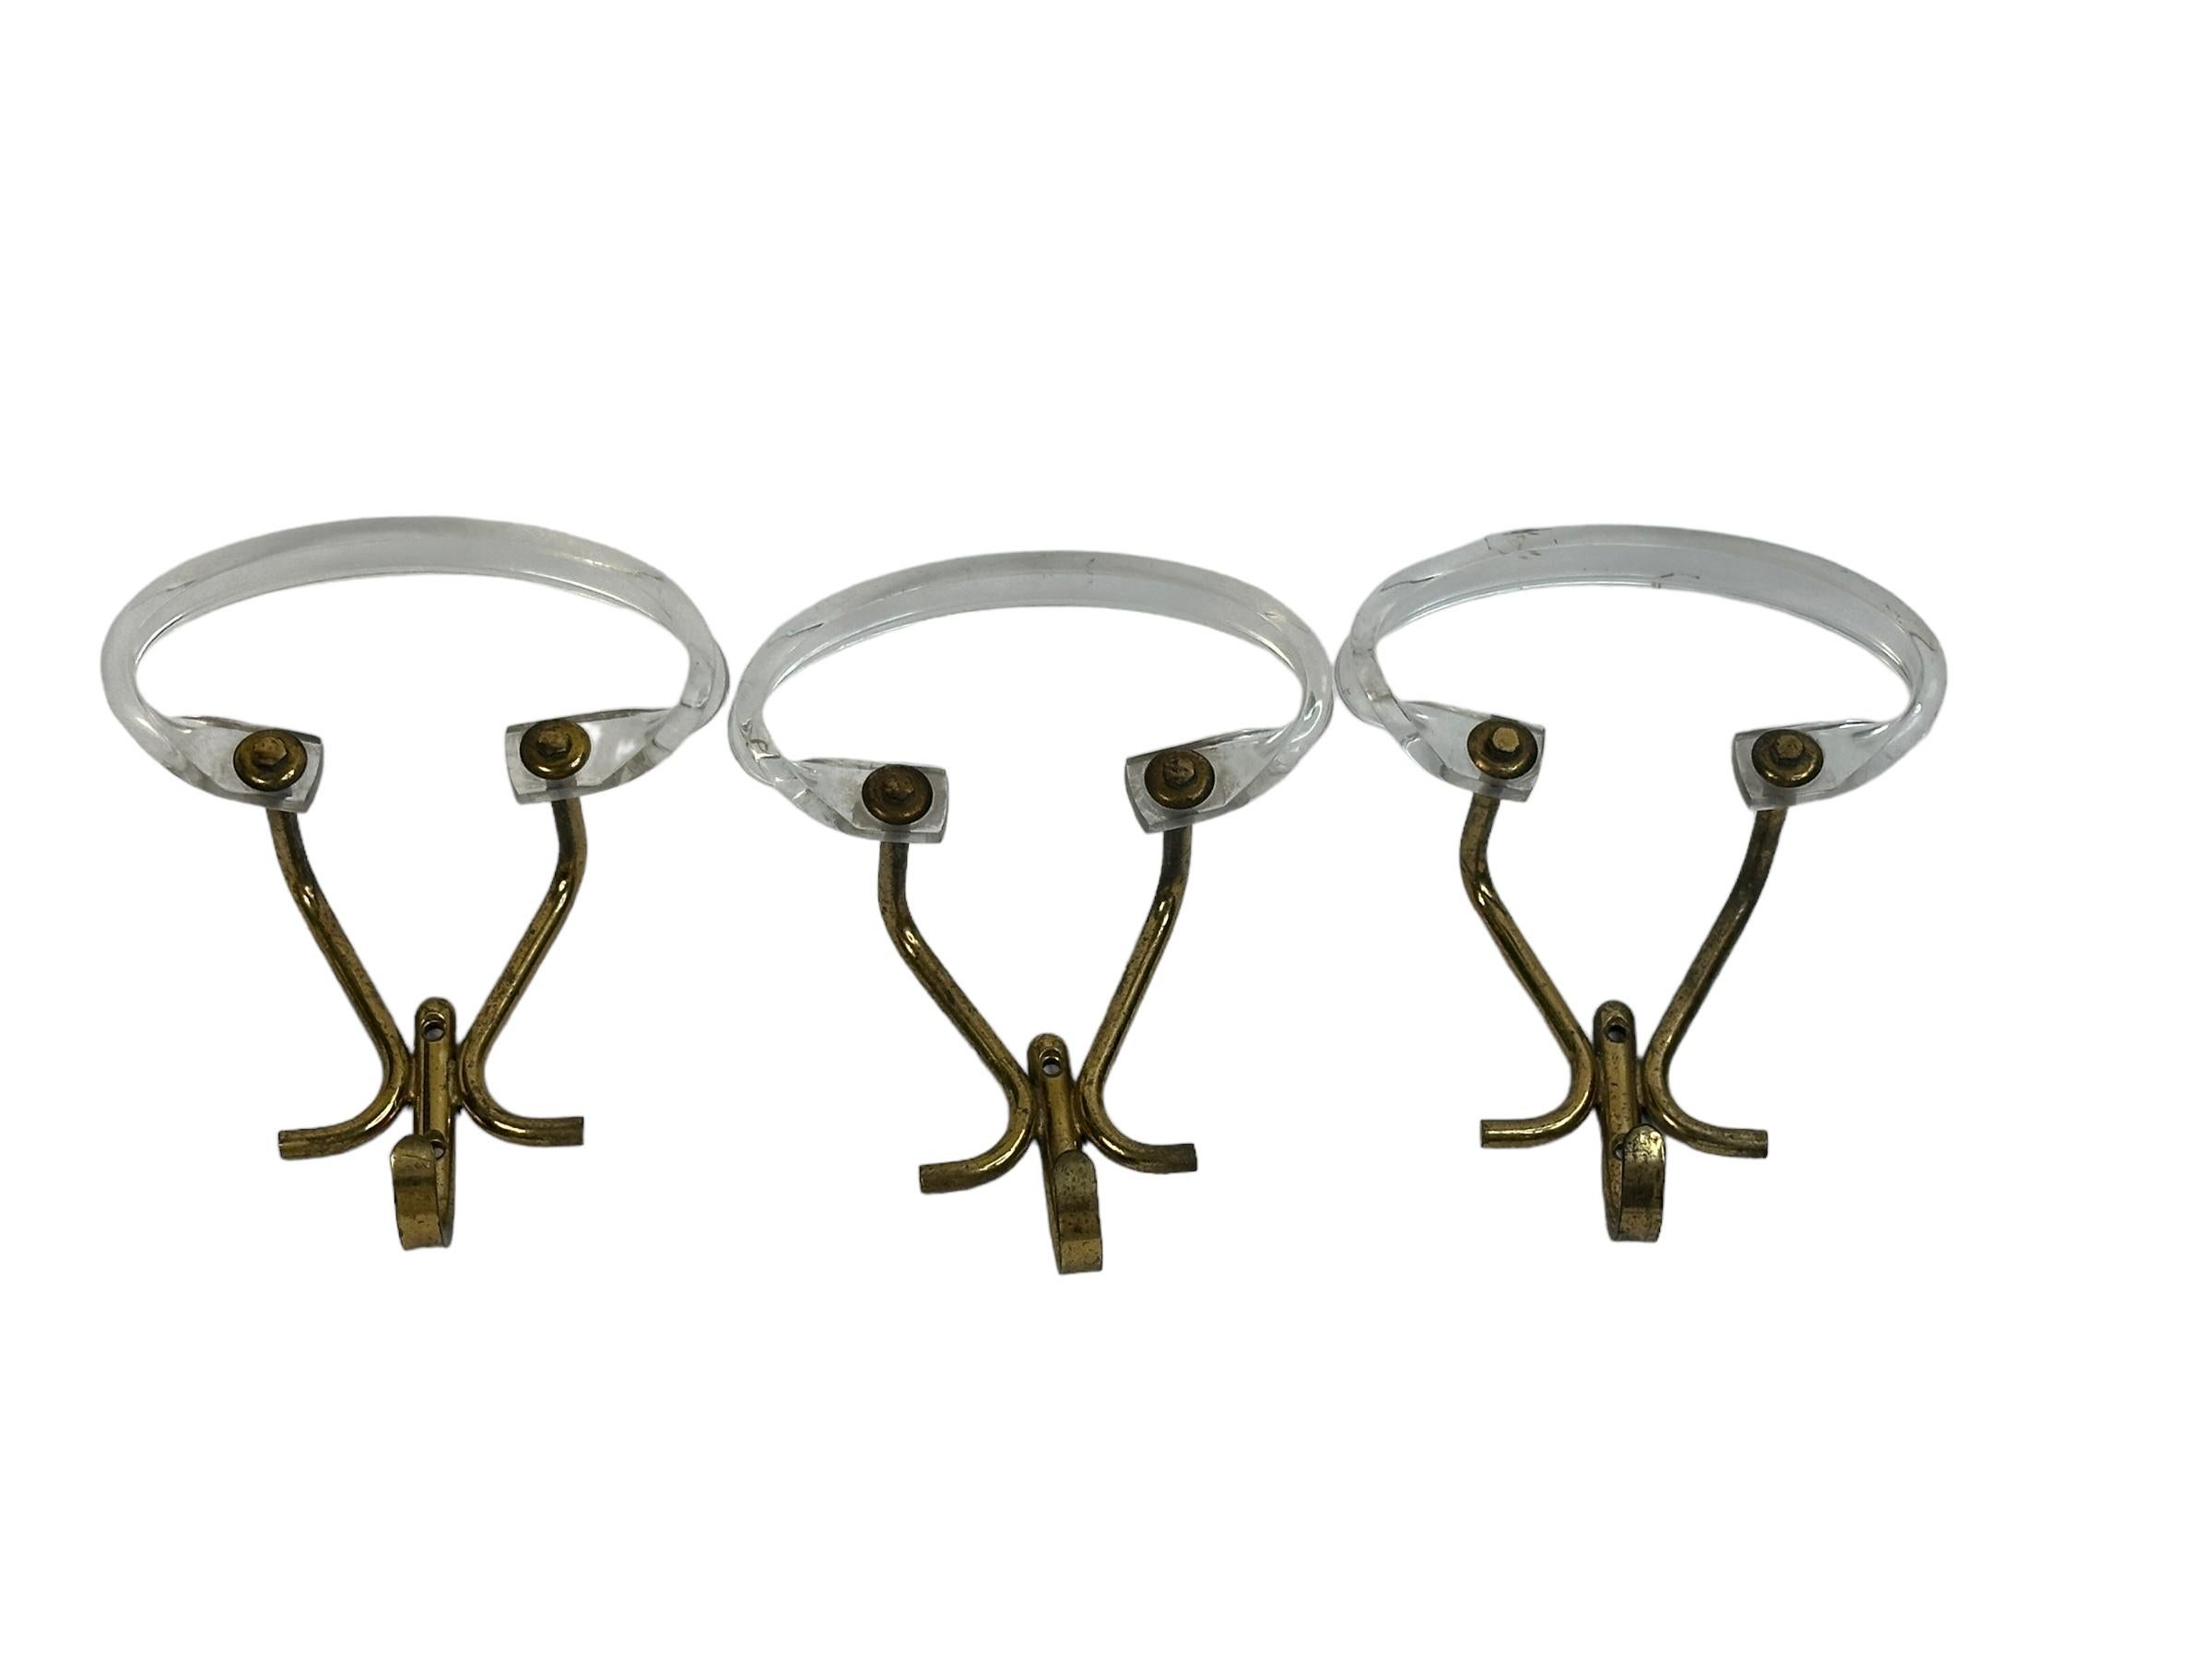 Set of Three Wall Coat Hooks, Lucite and Brass, Mid-Century Modern, 1960s In Good Condition For Sale In Nuernberg, DE